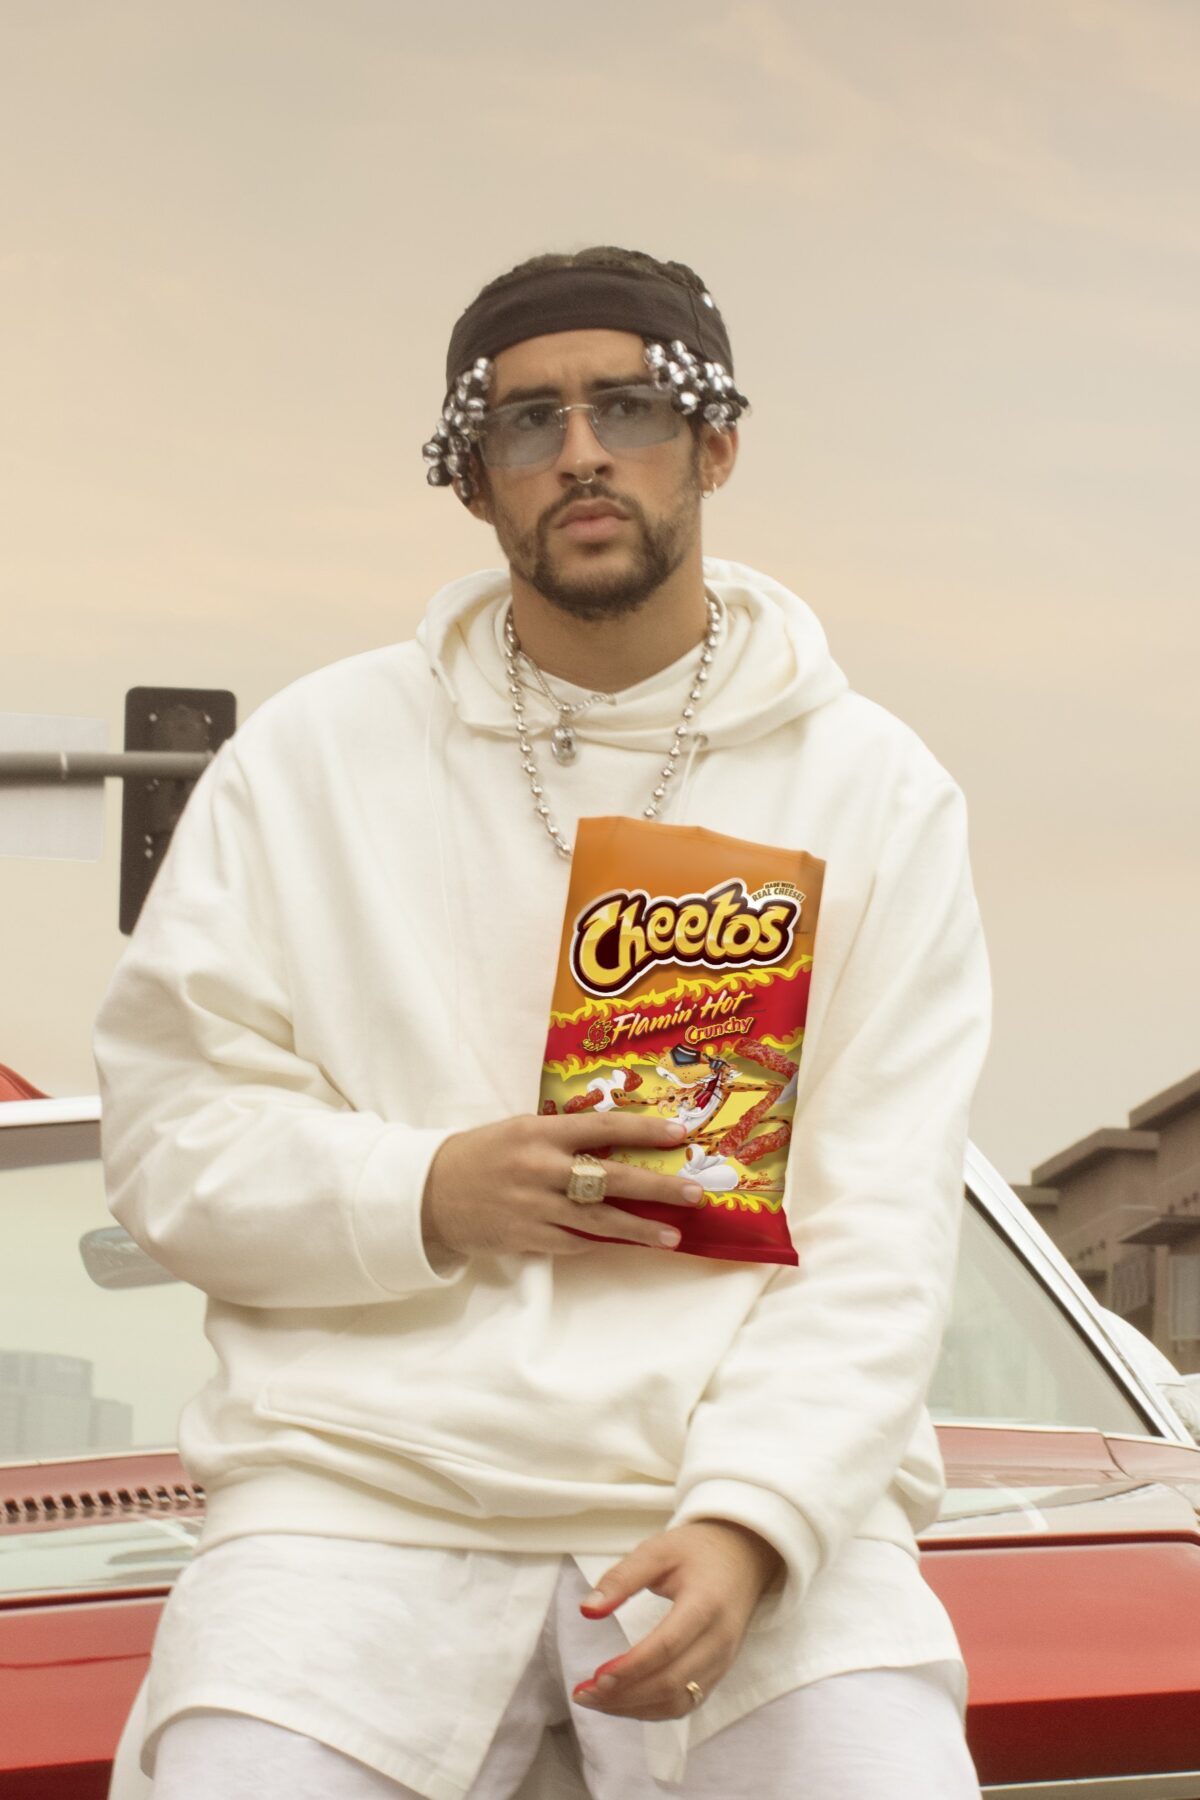 Bad Bunny in Cheetos campaign for Deja tu Huella (Leave Your Mark)